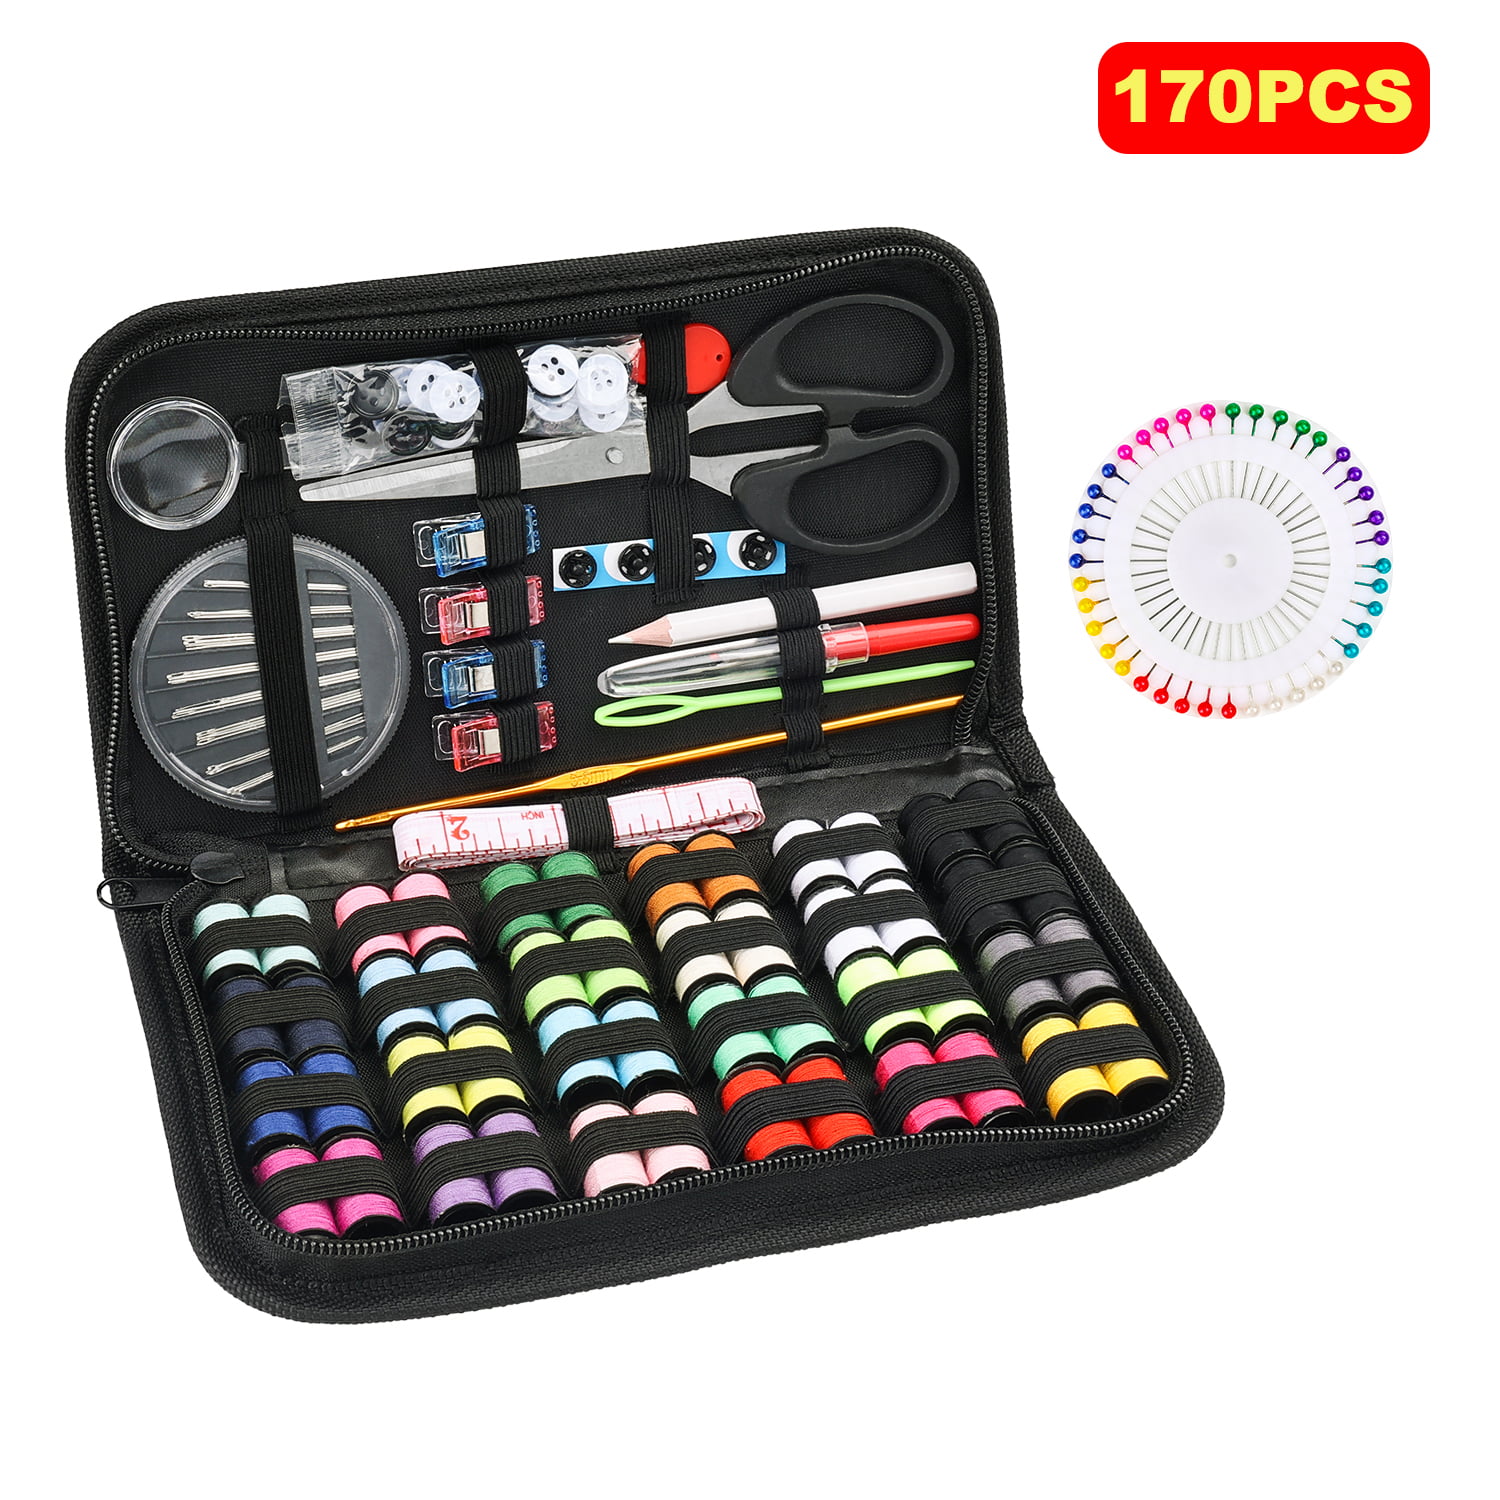 Sewing Kit, Sew Kit for Adults OKOM 128Pcs, Beginner, Home, Traveler, DIY,  Emergency- Premium Sewing Kits, Portable Large- Filled with Sewing